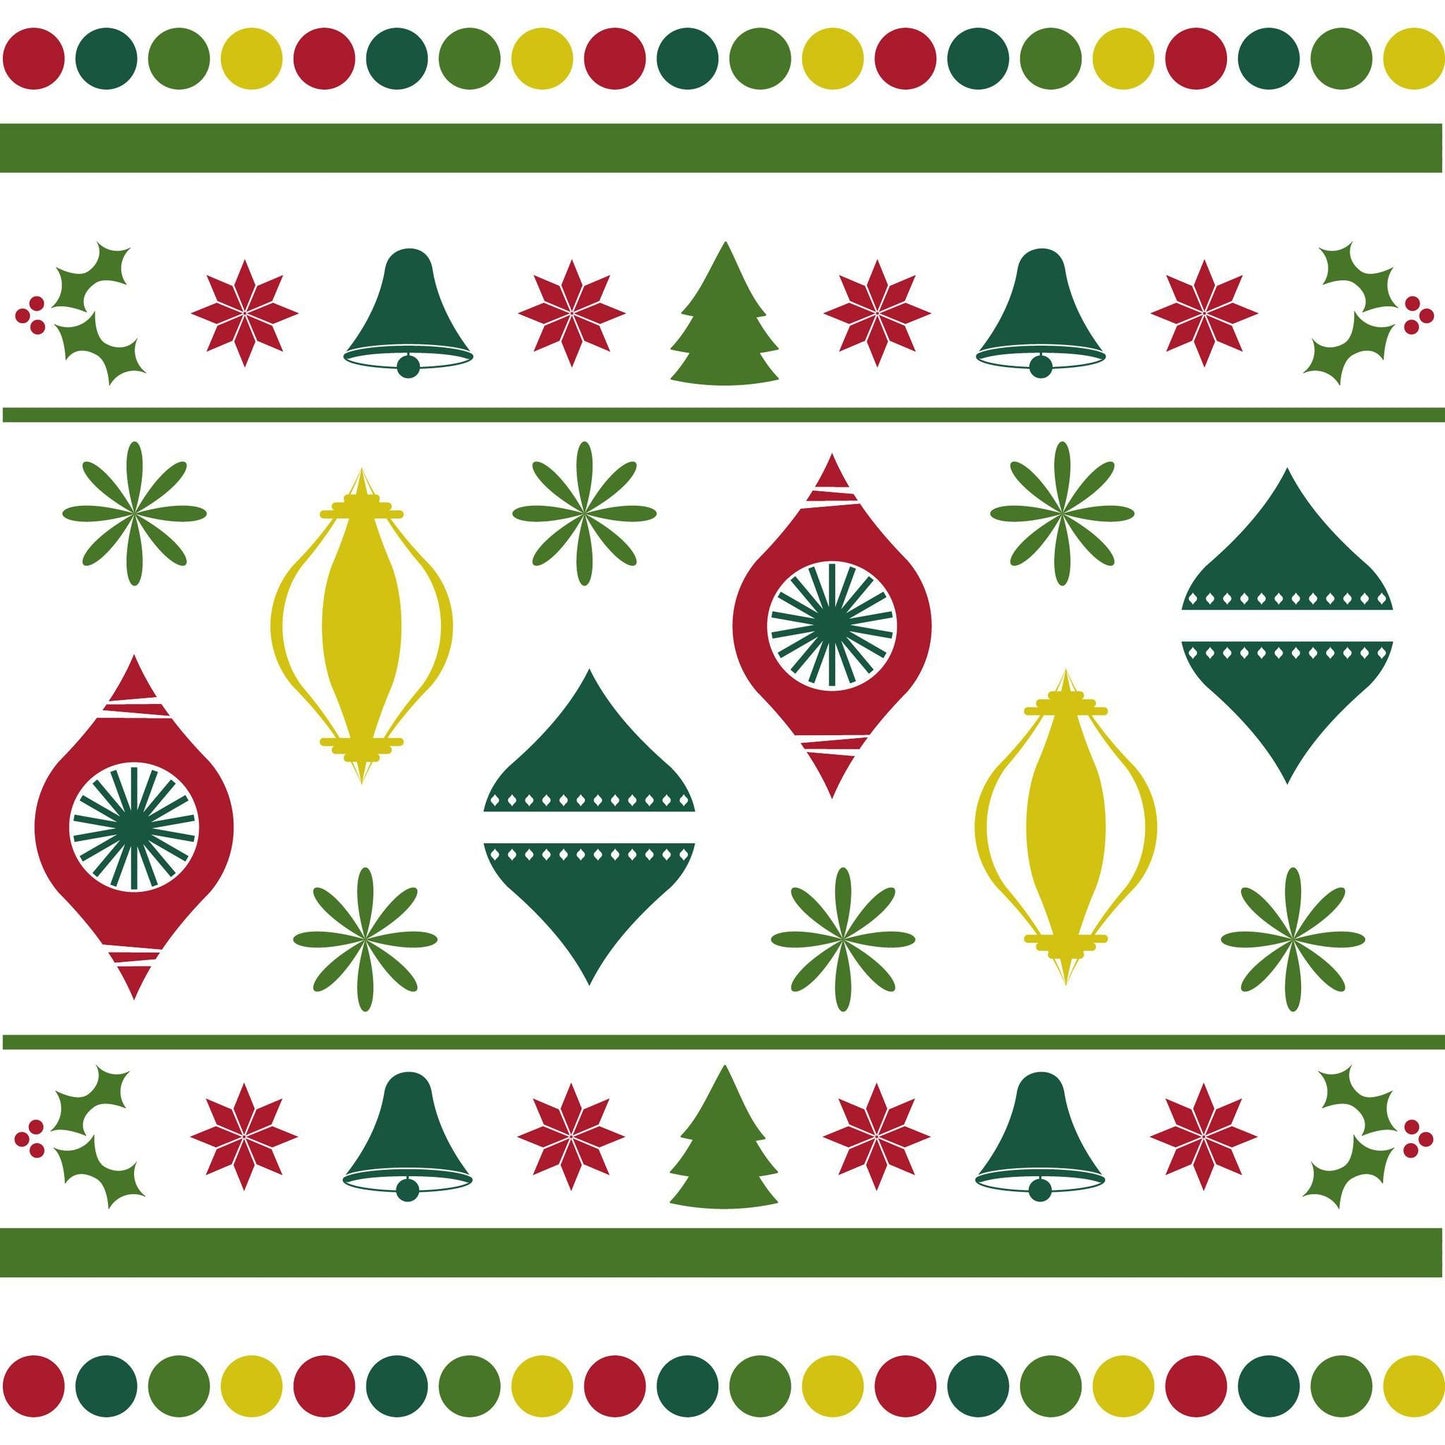 Christmas Sticker Sheet with Round Circle Stickers